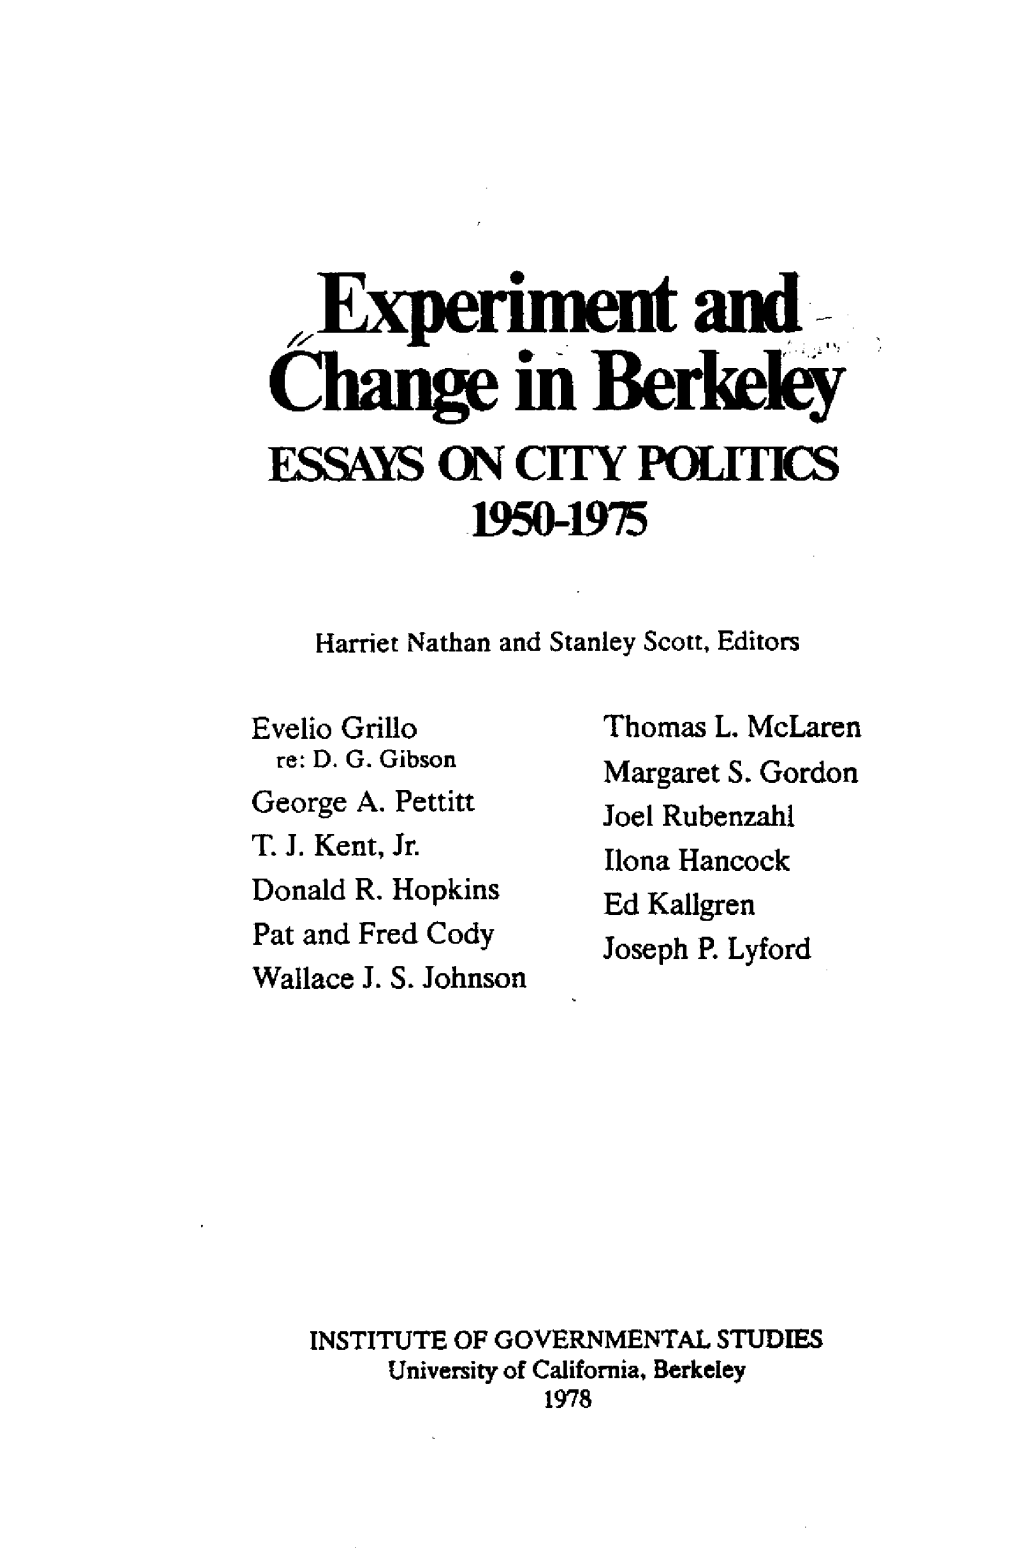 Experiment and Change in Berkeley: Essays on City Politics, 1950-1975